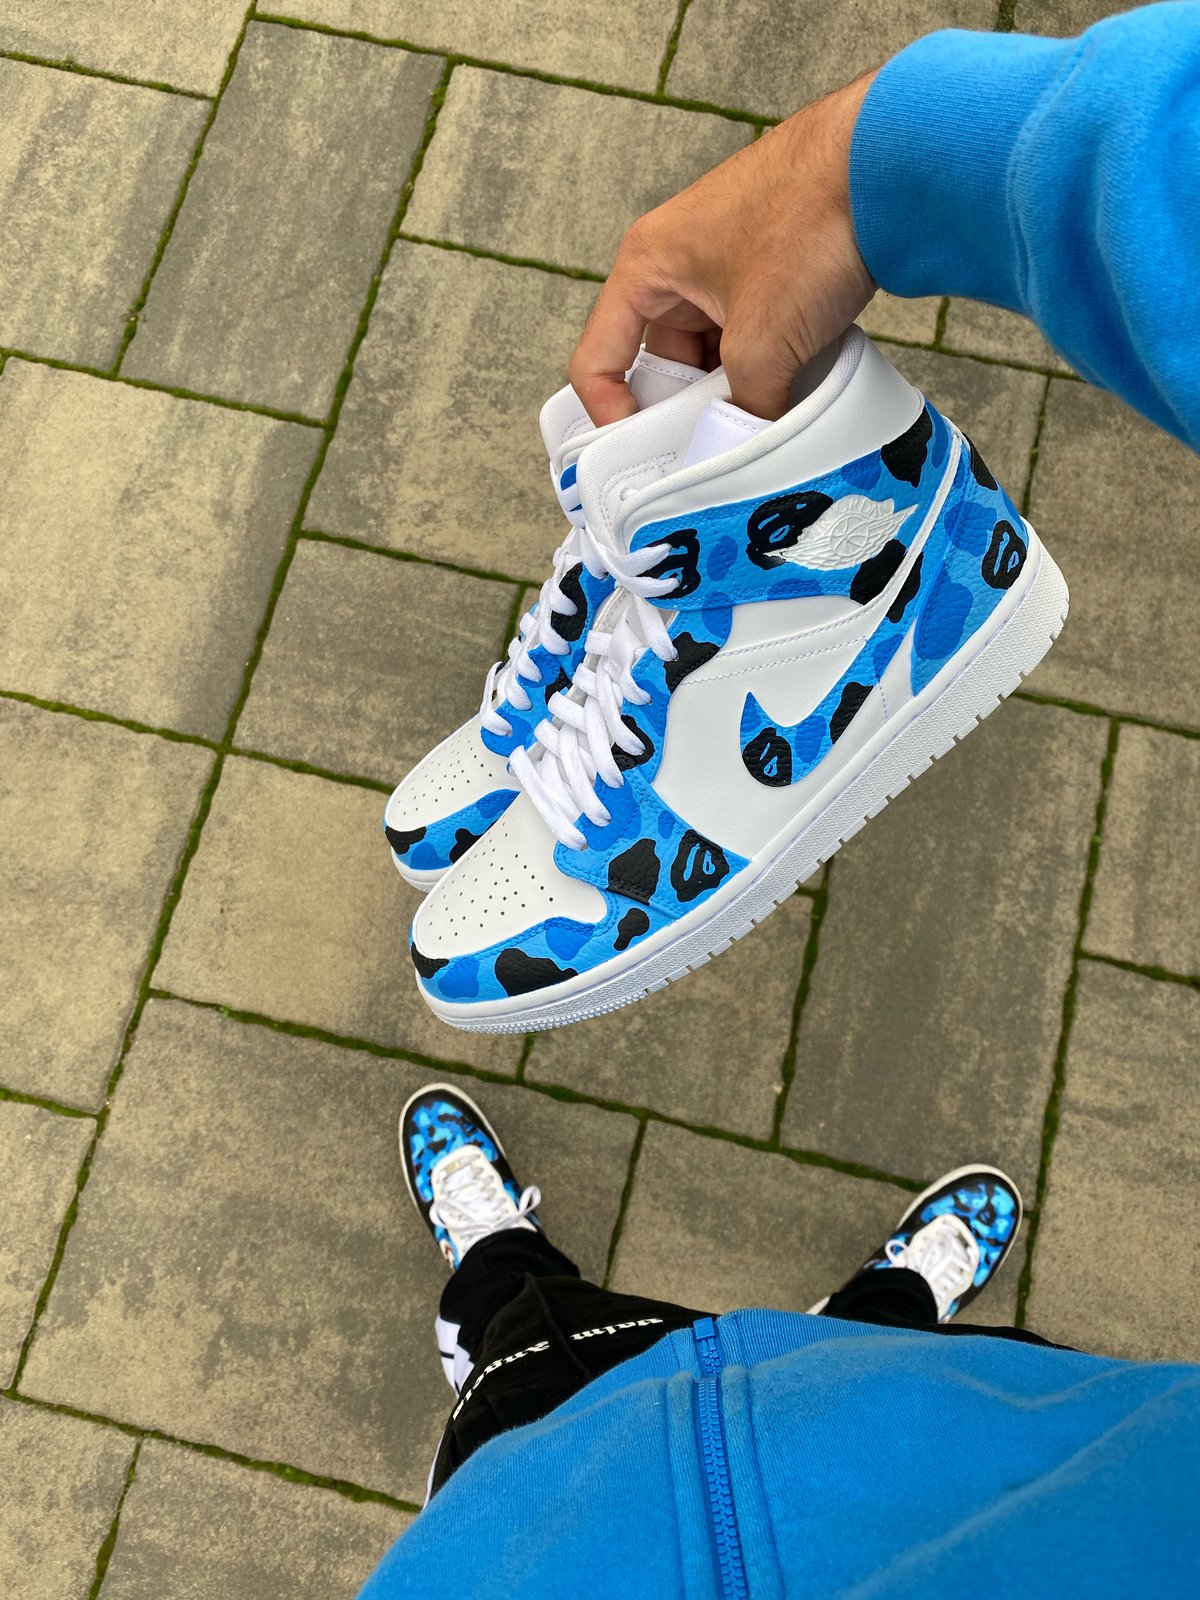 all blue 1s